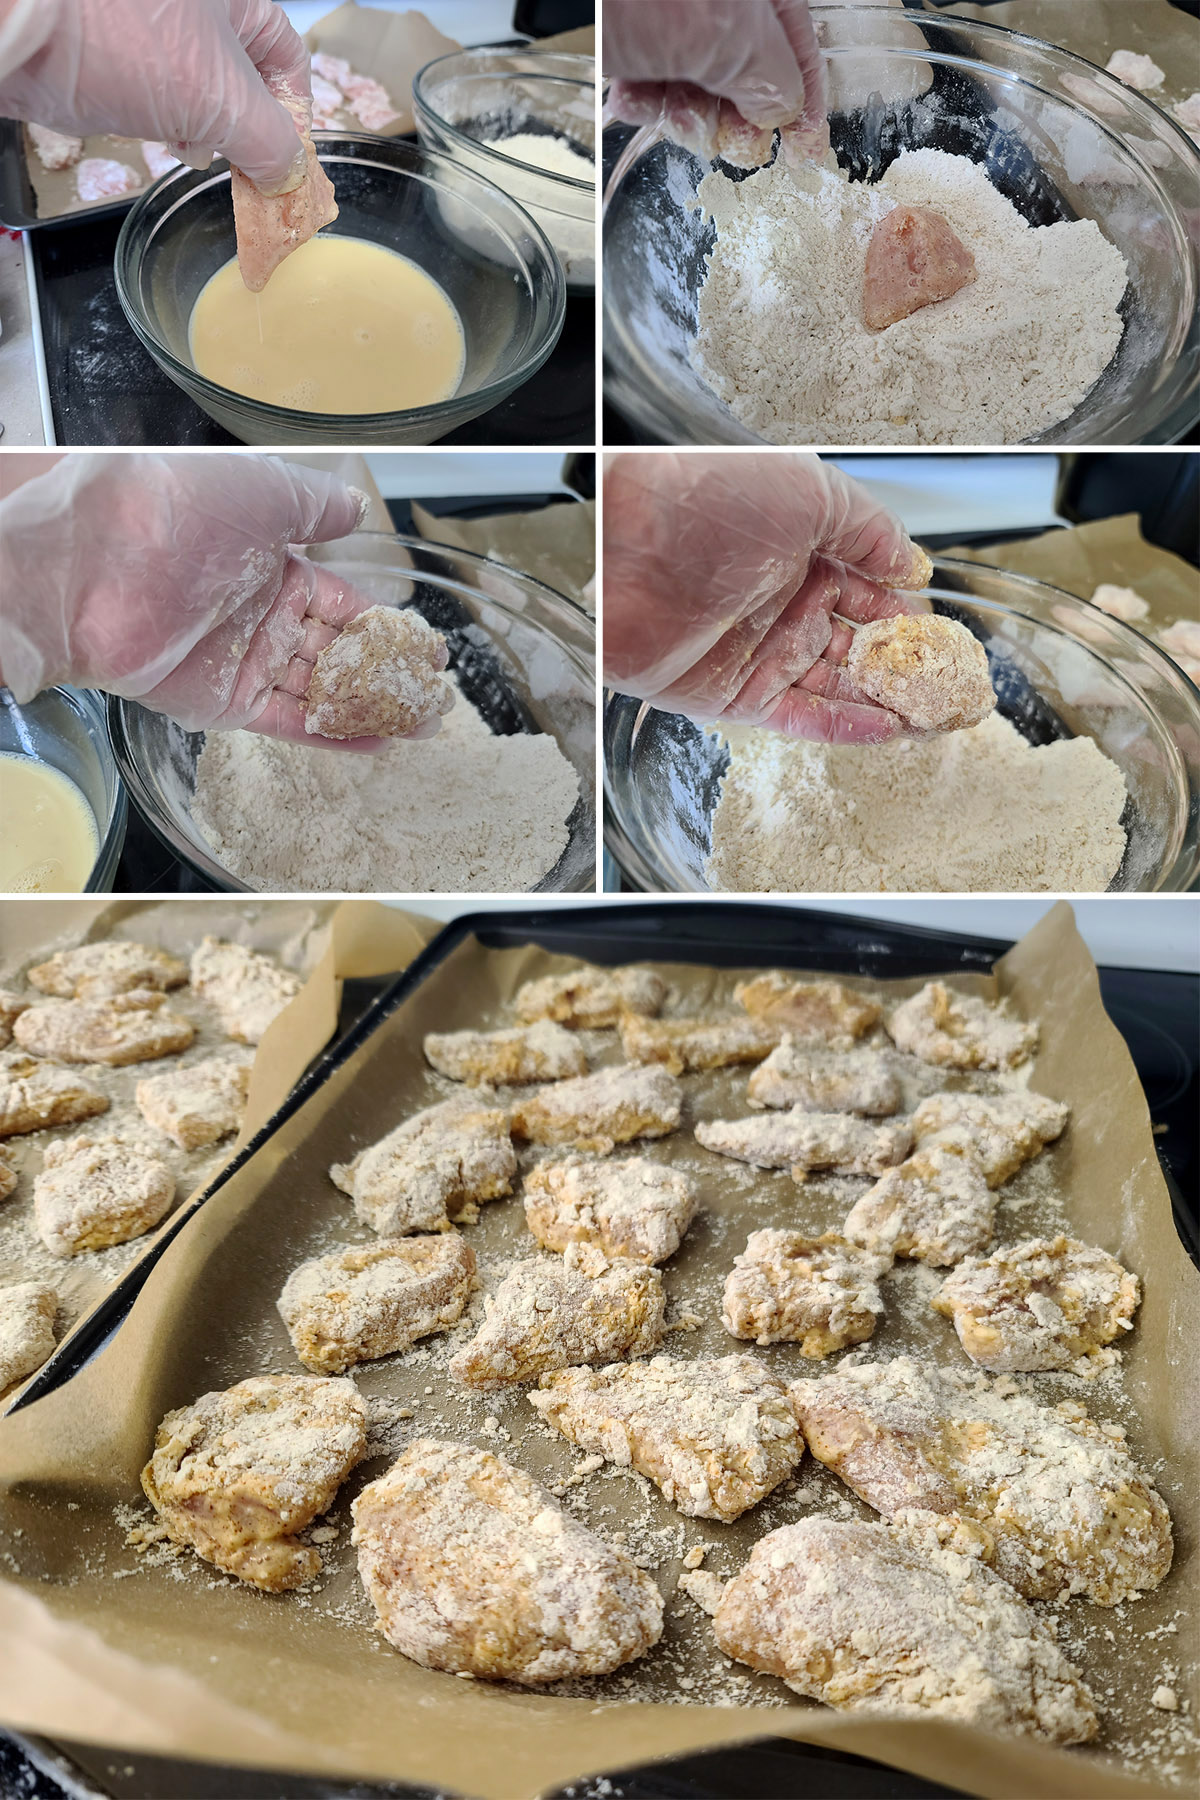 A 5 part image showing the chicken pieces being coated as described in the post.